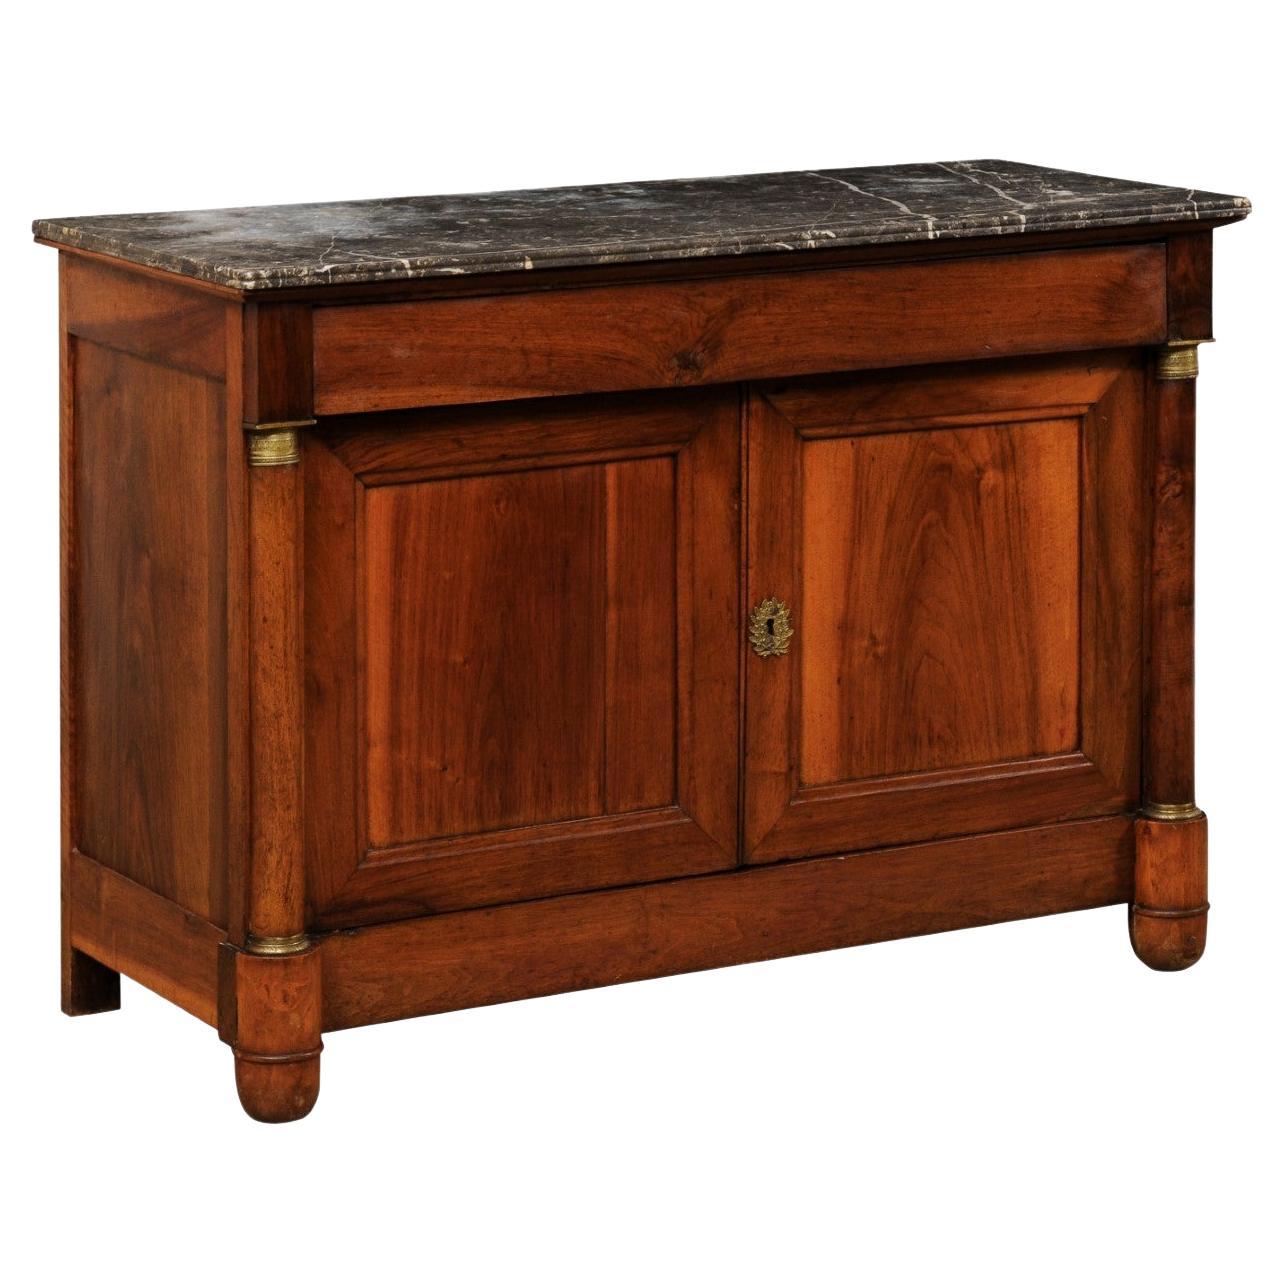 French Napoleon III Buffet Cabinet with Its Original Marble Top, circa 1820